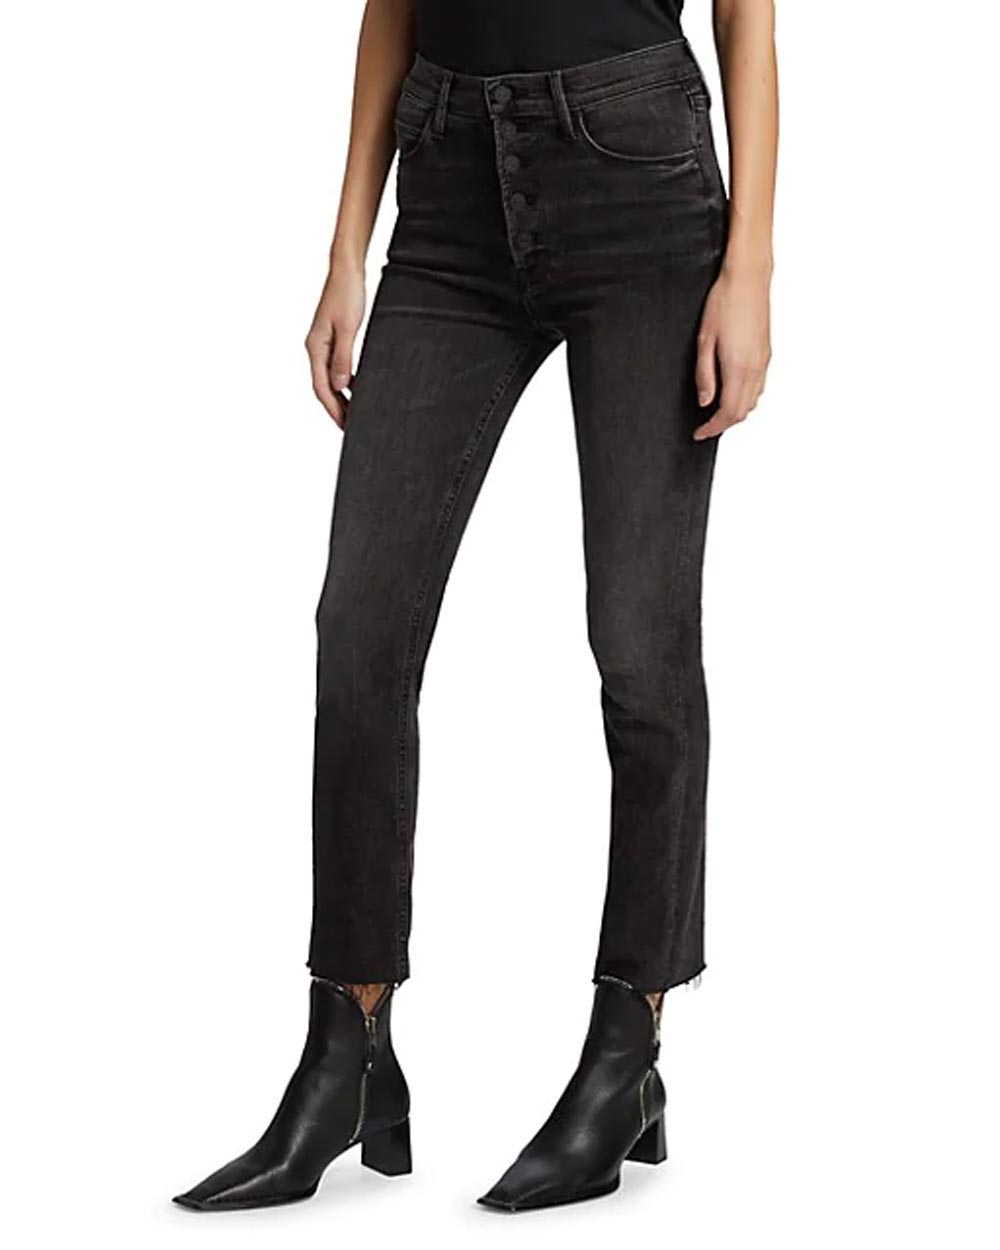 The Pixie Dazzler Ankle Fray Jean in Night Shadow